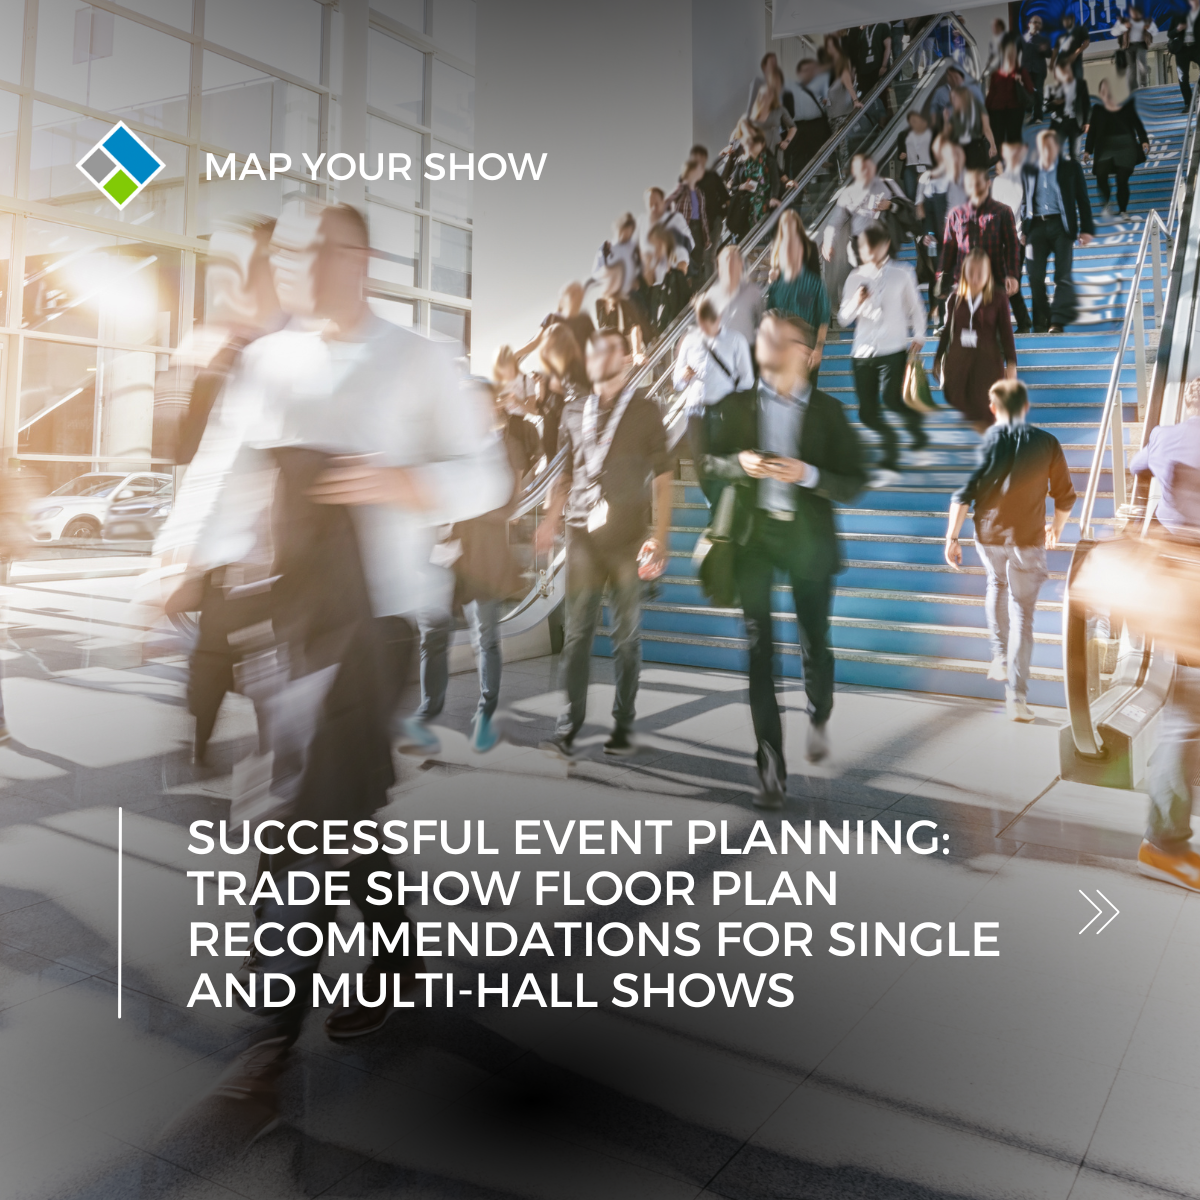 Successful Event Planning. Trade Show Floor Plan Recommendations for Single and Multi-Hall Shows